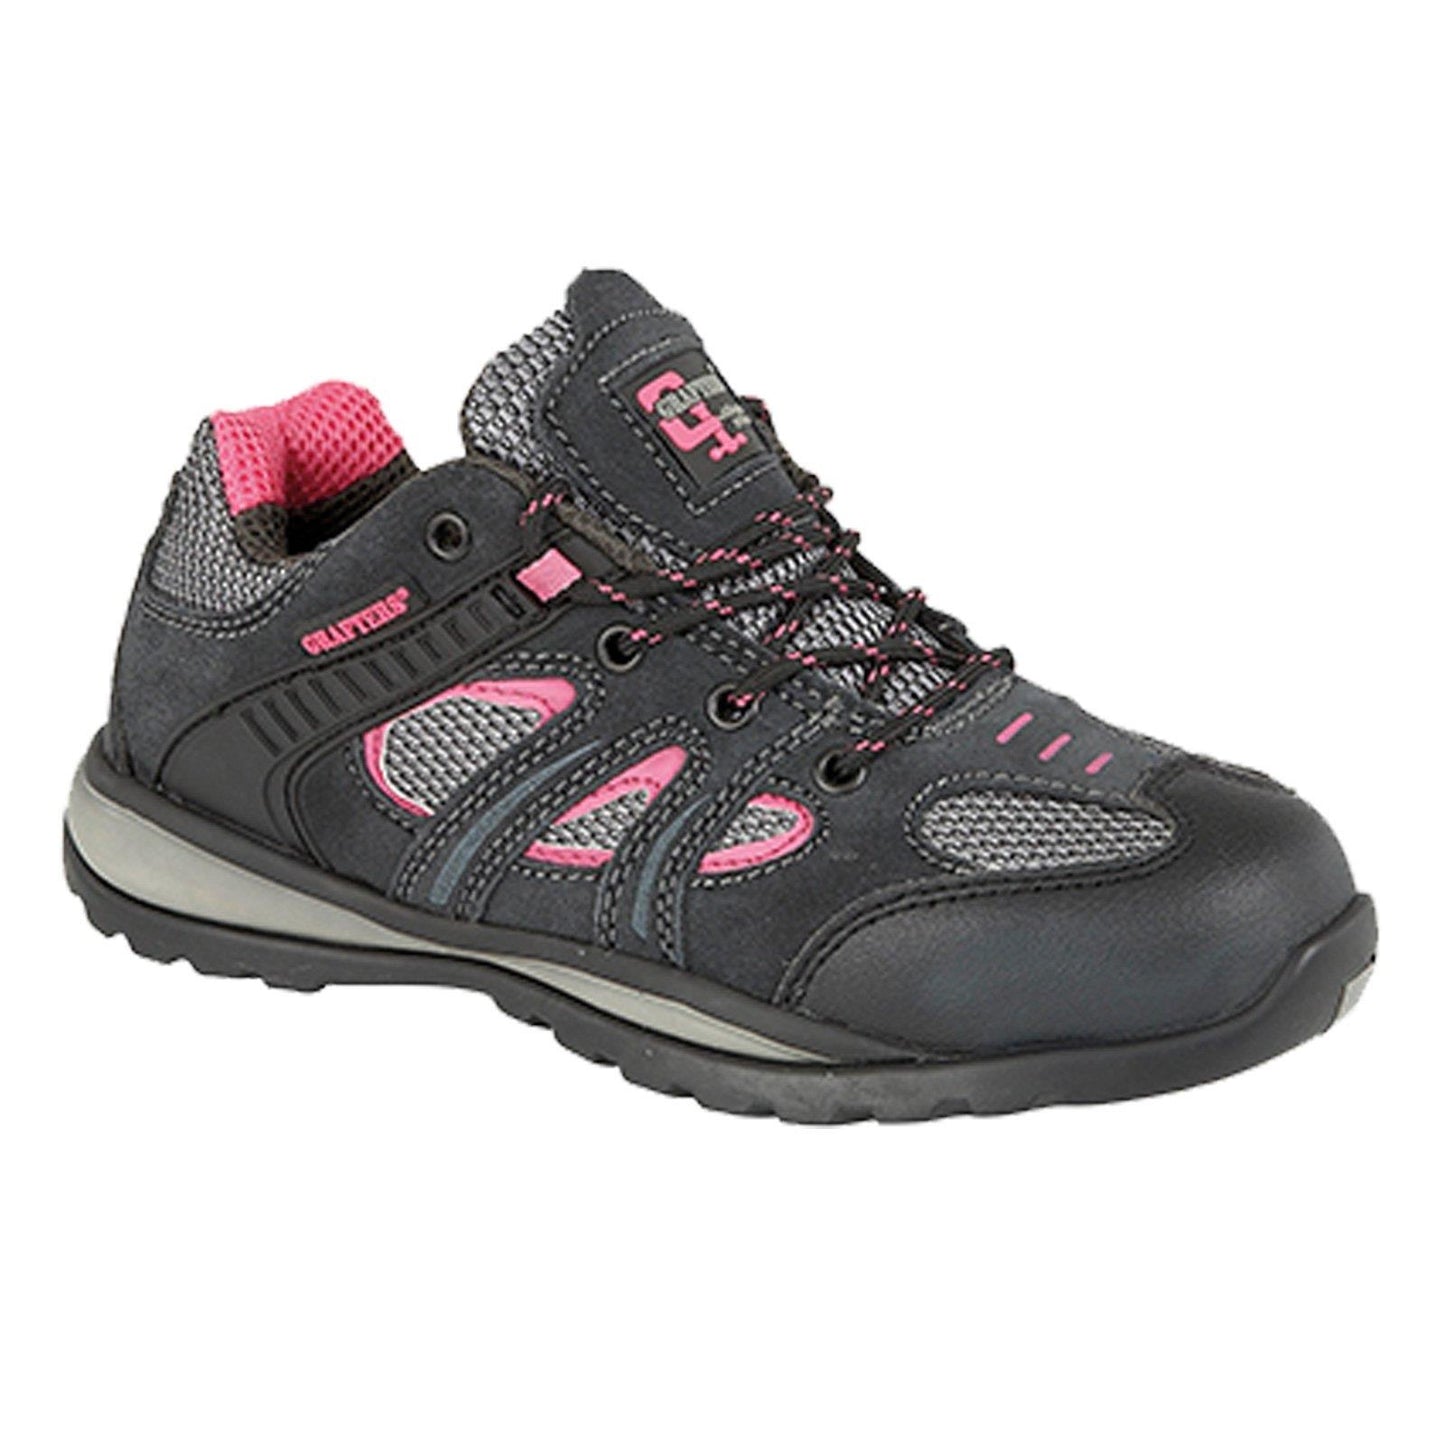 Ladies Grafters Safety Trainer Work Shoes Grey/pink Suede Size